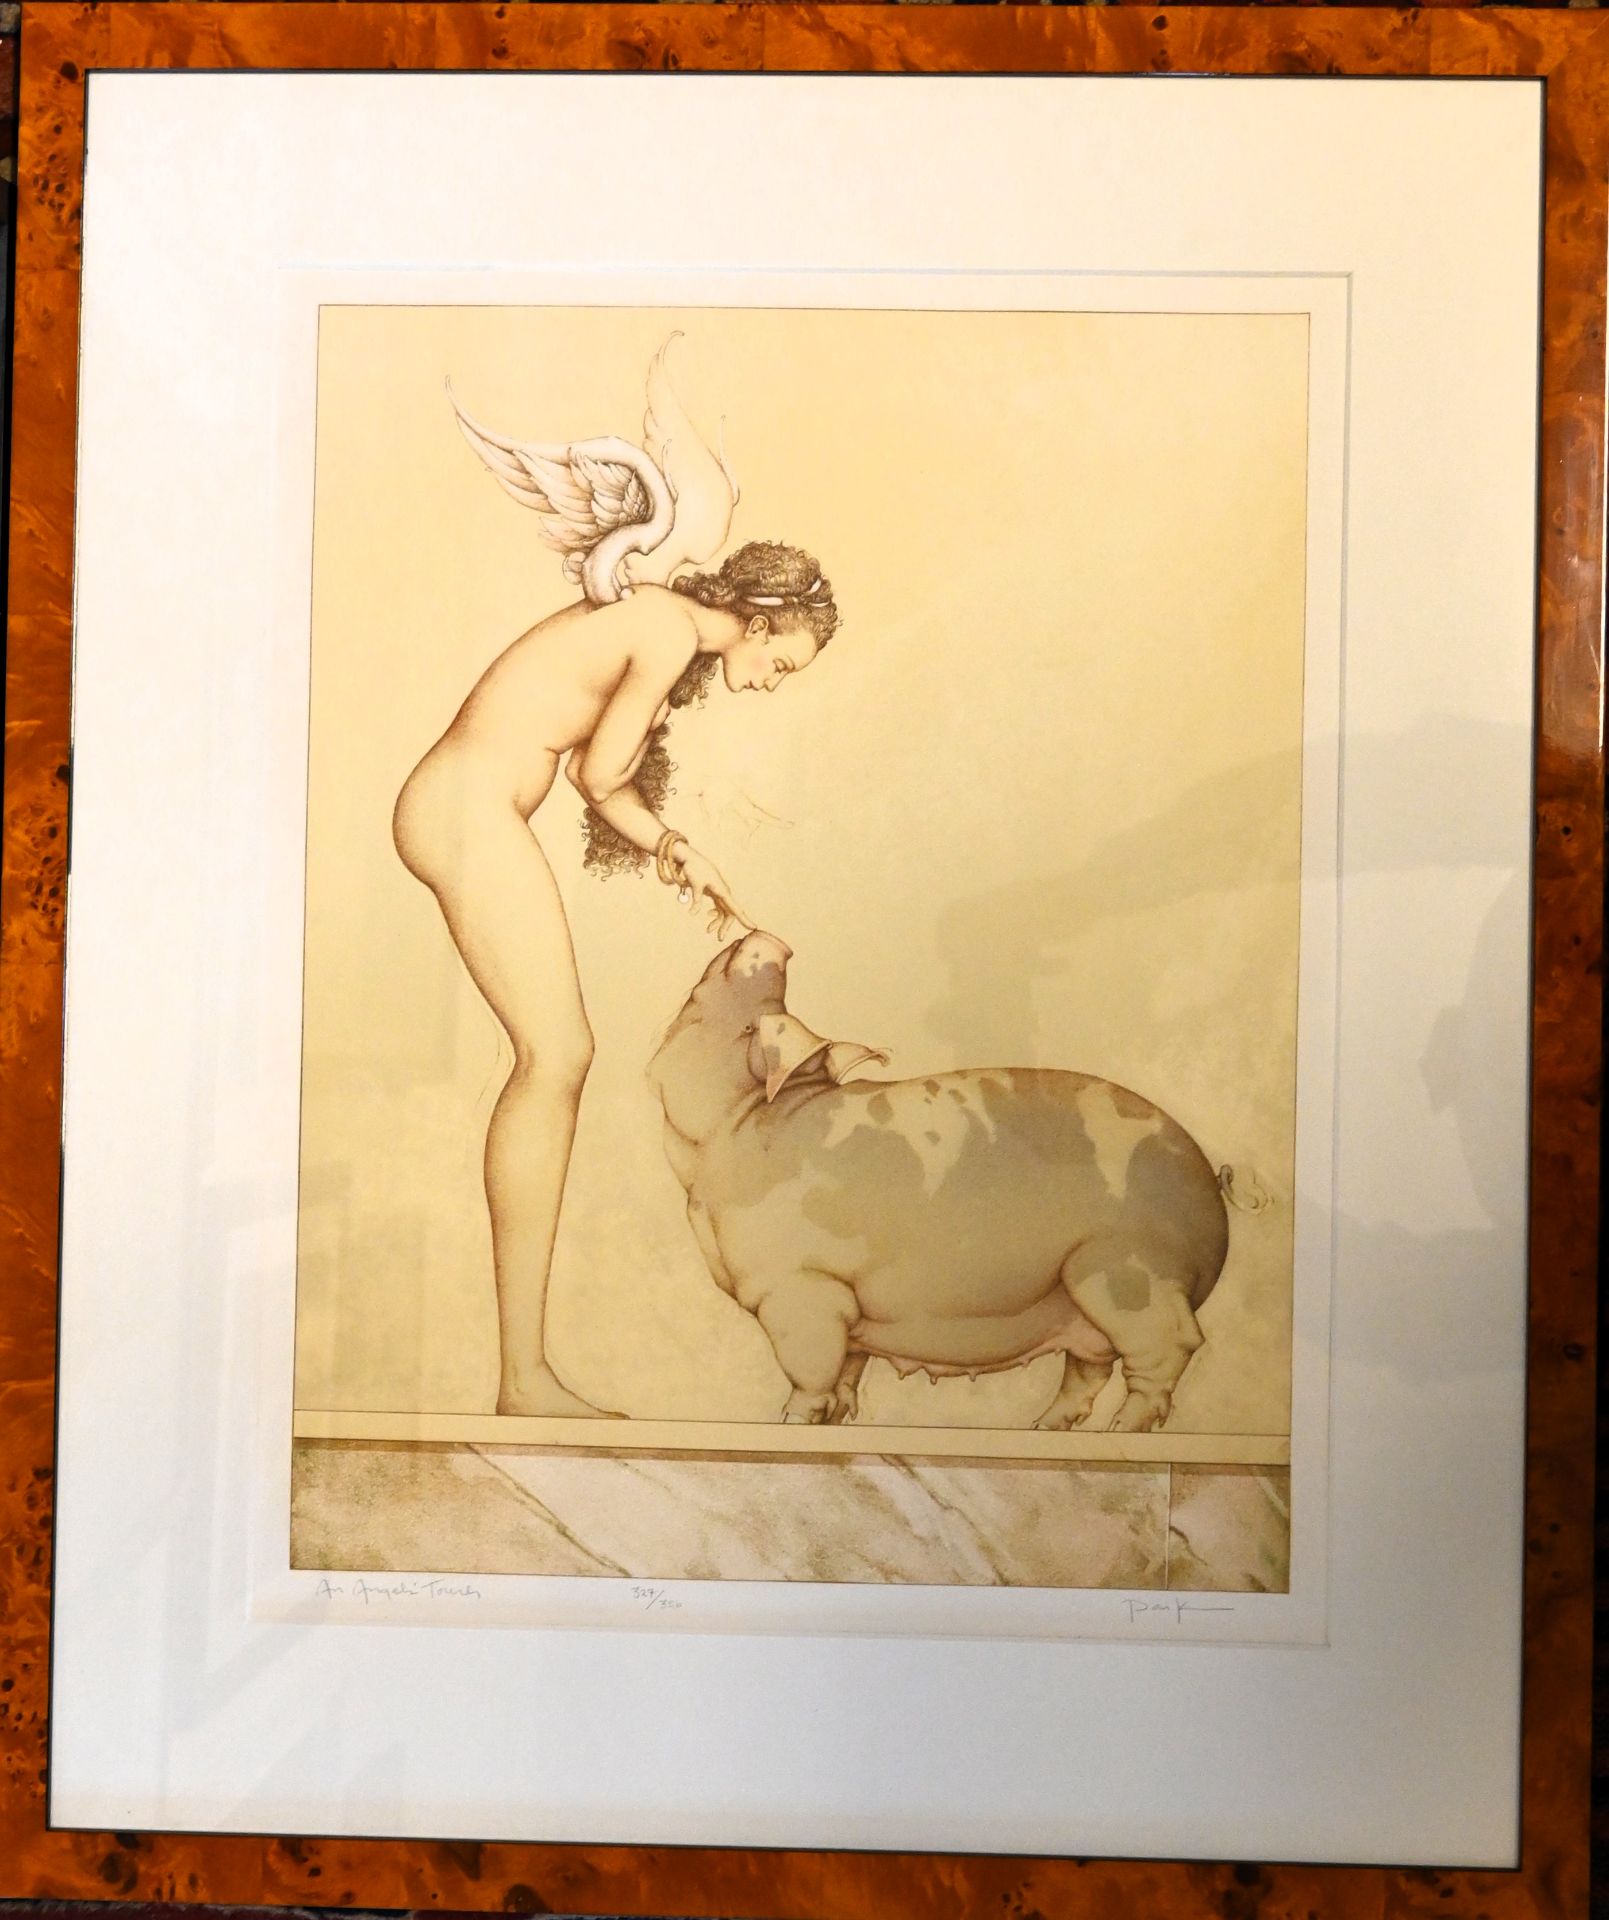 Michael Parkes (b.1944) American, An Angel's Touch, signed and numbered 3/25 AE, lithograph, 102 x - Image 2 of 4